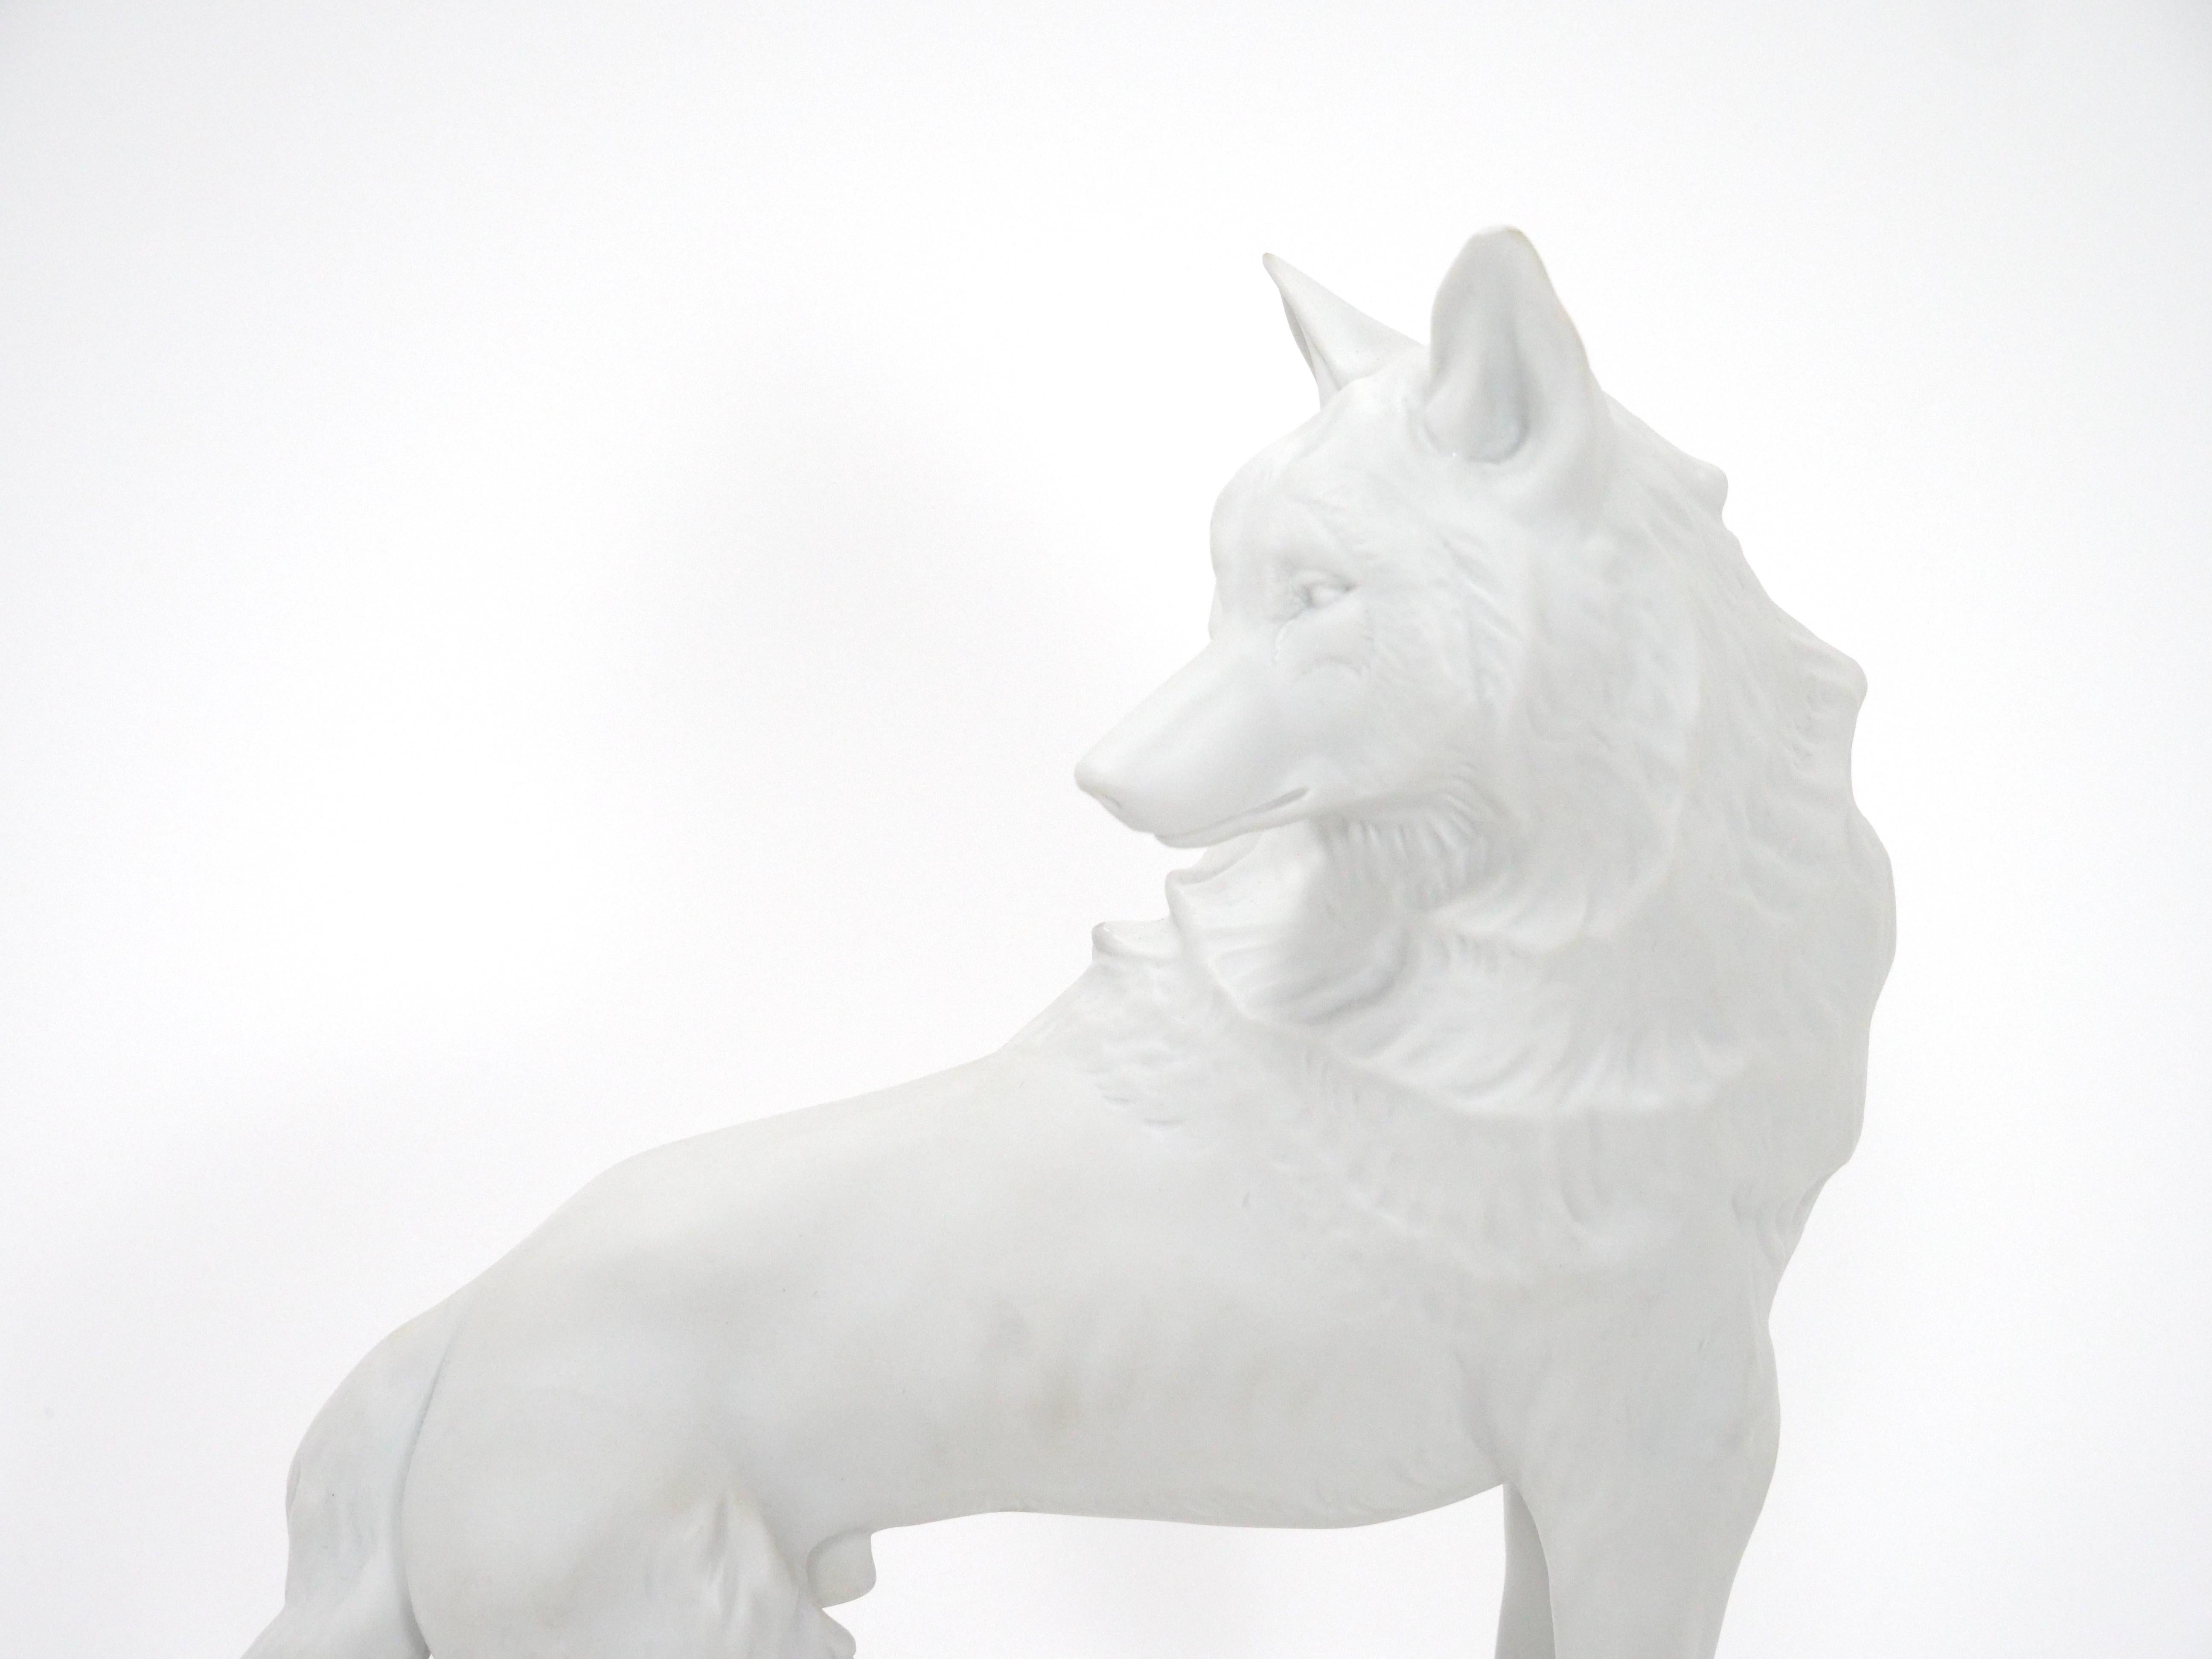 Discover the exceptional artistry of this exquisite Tiffany & Co decorative wolf sculpture, crafted in the early 20th century by the esteemed Nymphenburg Porcelain in Germany. This beautiful sculpture showcases the mastery of white bisque porcelain,